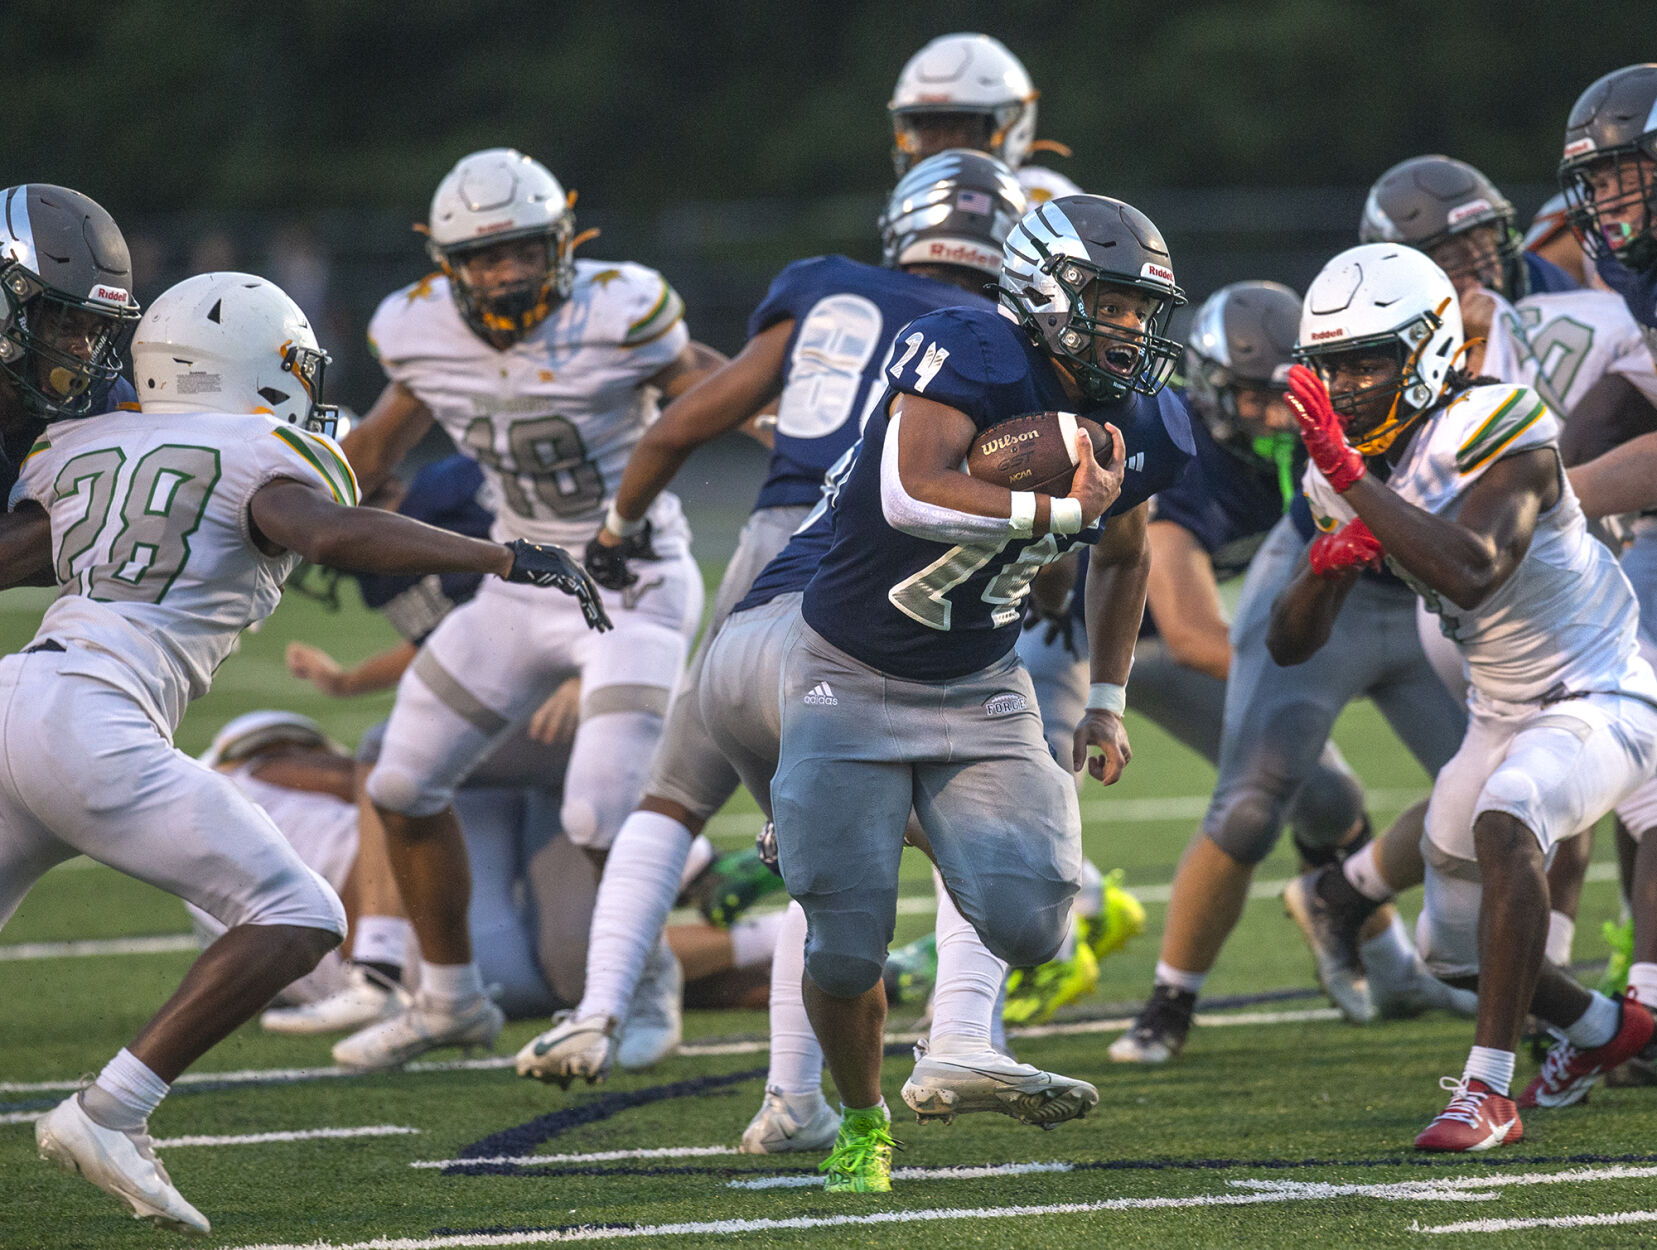 Former Woodbridge QB Ethan Horne led Colonial Forge to victory with four touchdowns